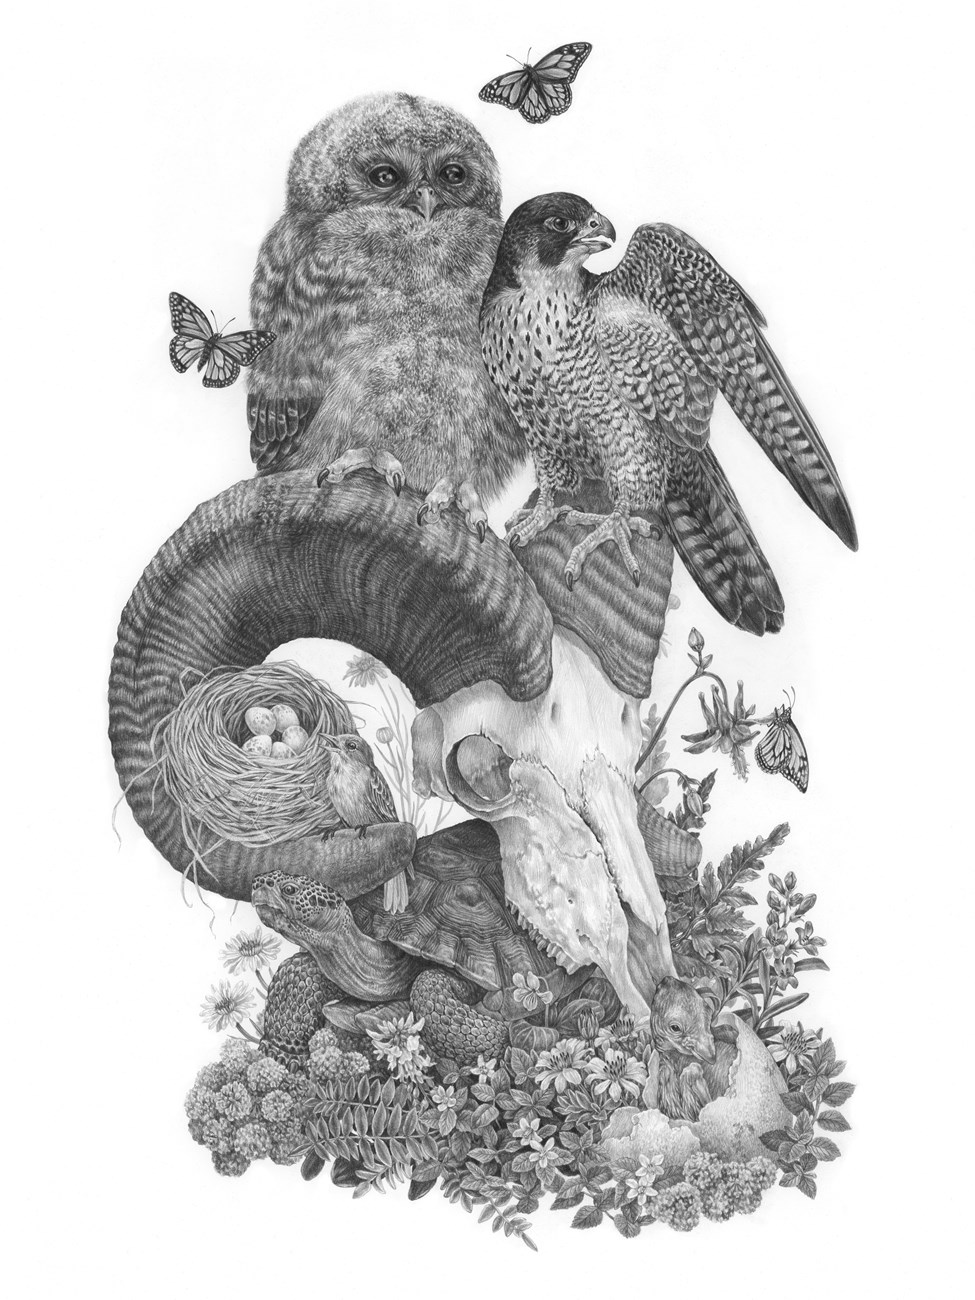 Detailed drawing of many special status species at Zion, including spotted owl, bighorn sheep, and peregrine falcon.